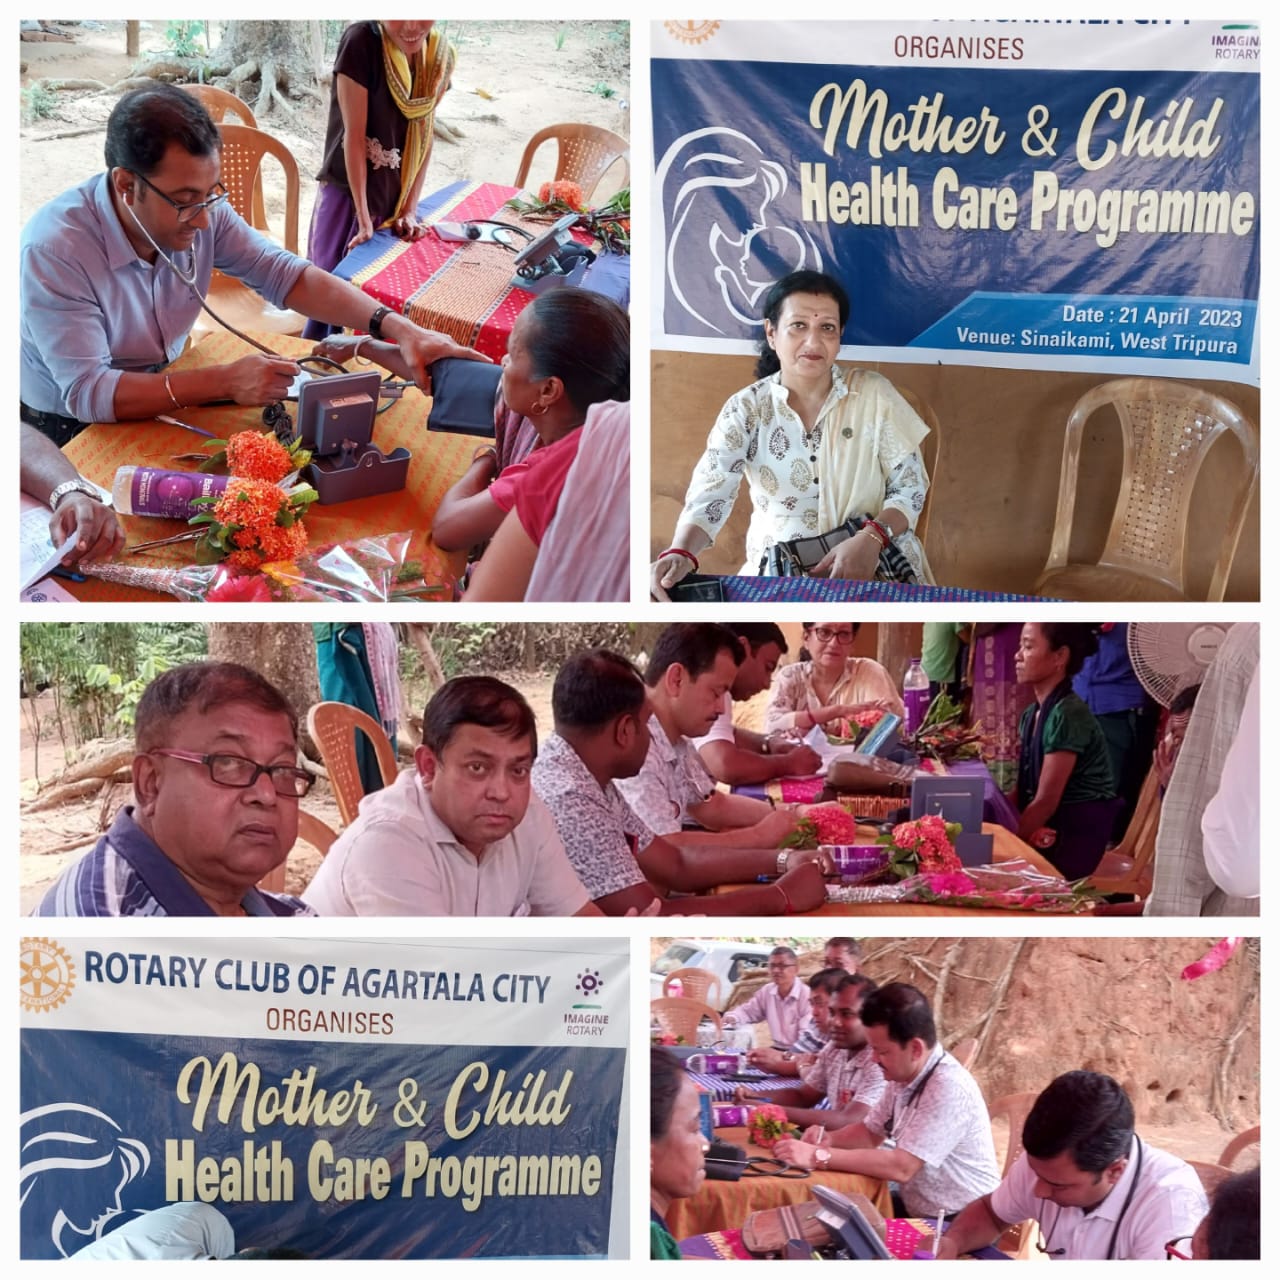 RCAC Health Camp on Mother and Child at Sinaikami Village, West Tripura on 21st April, 2023